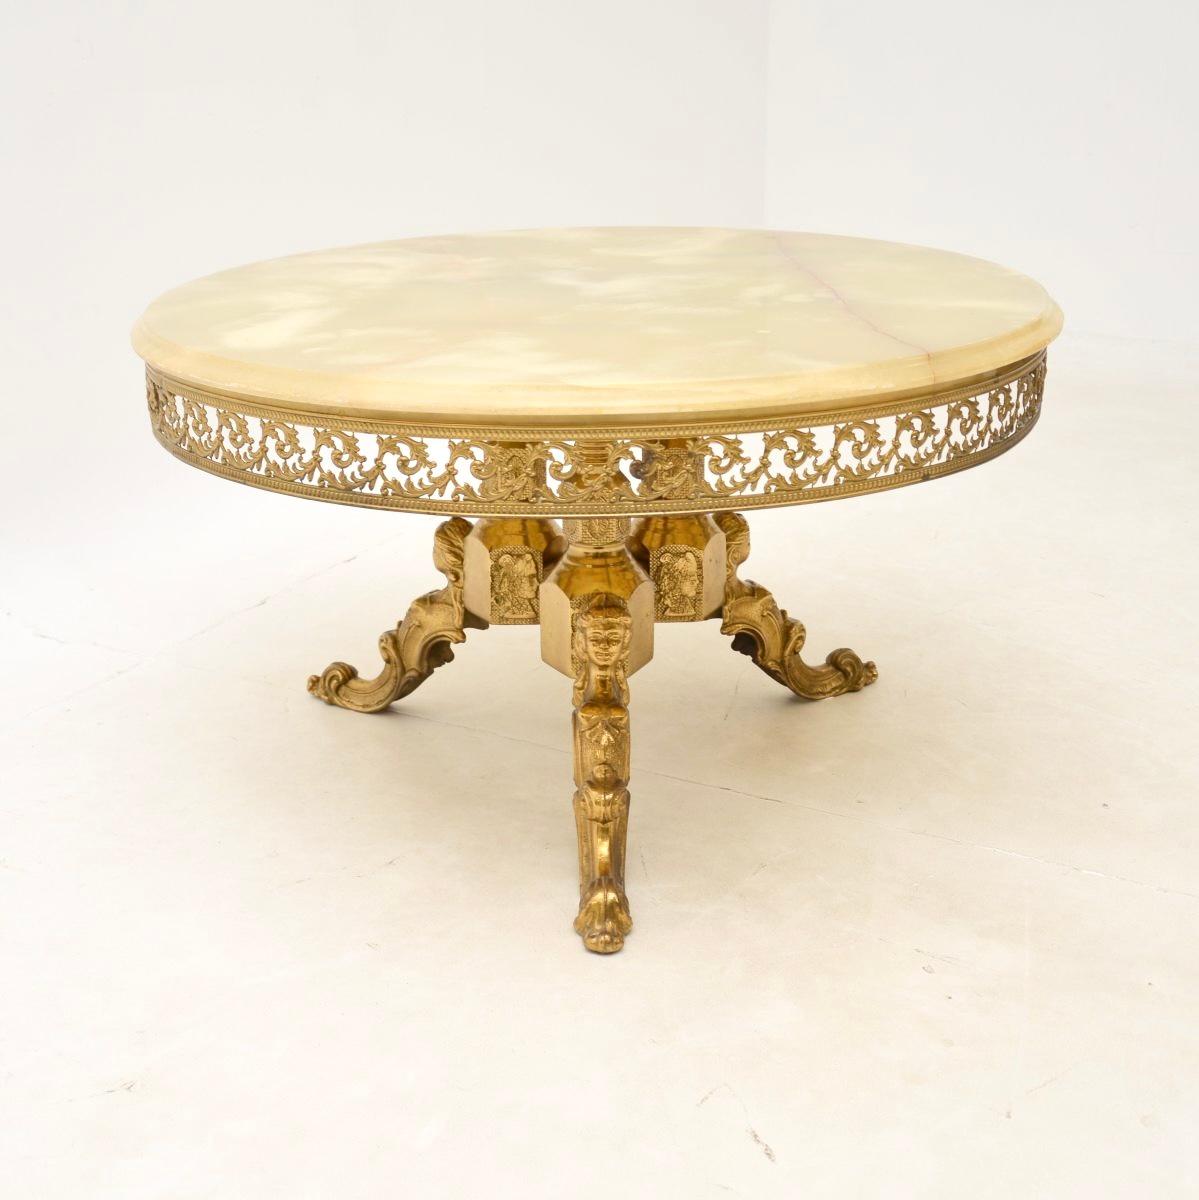 A beautiful antique French brass and onyx coffee table, dating from around the 1930’s.

This is of lovely quality and is a very useful size. The large circular onyx top has a gorgeous colour, it sits on a beautifully made solid brass base which has